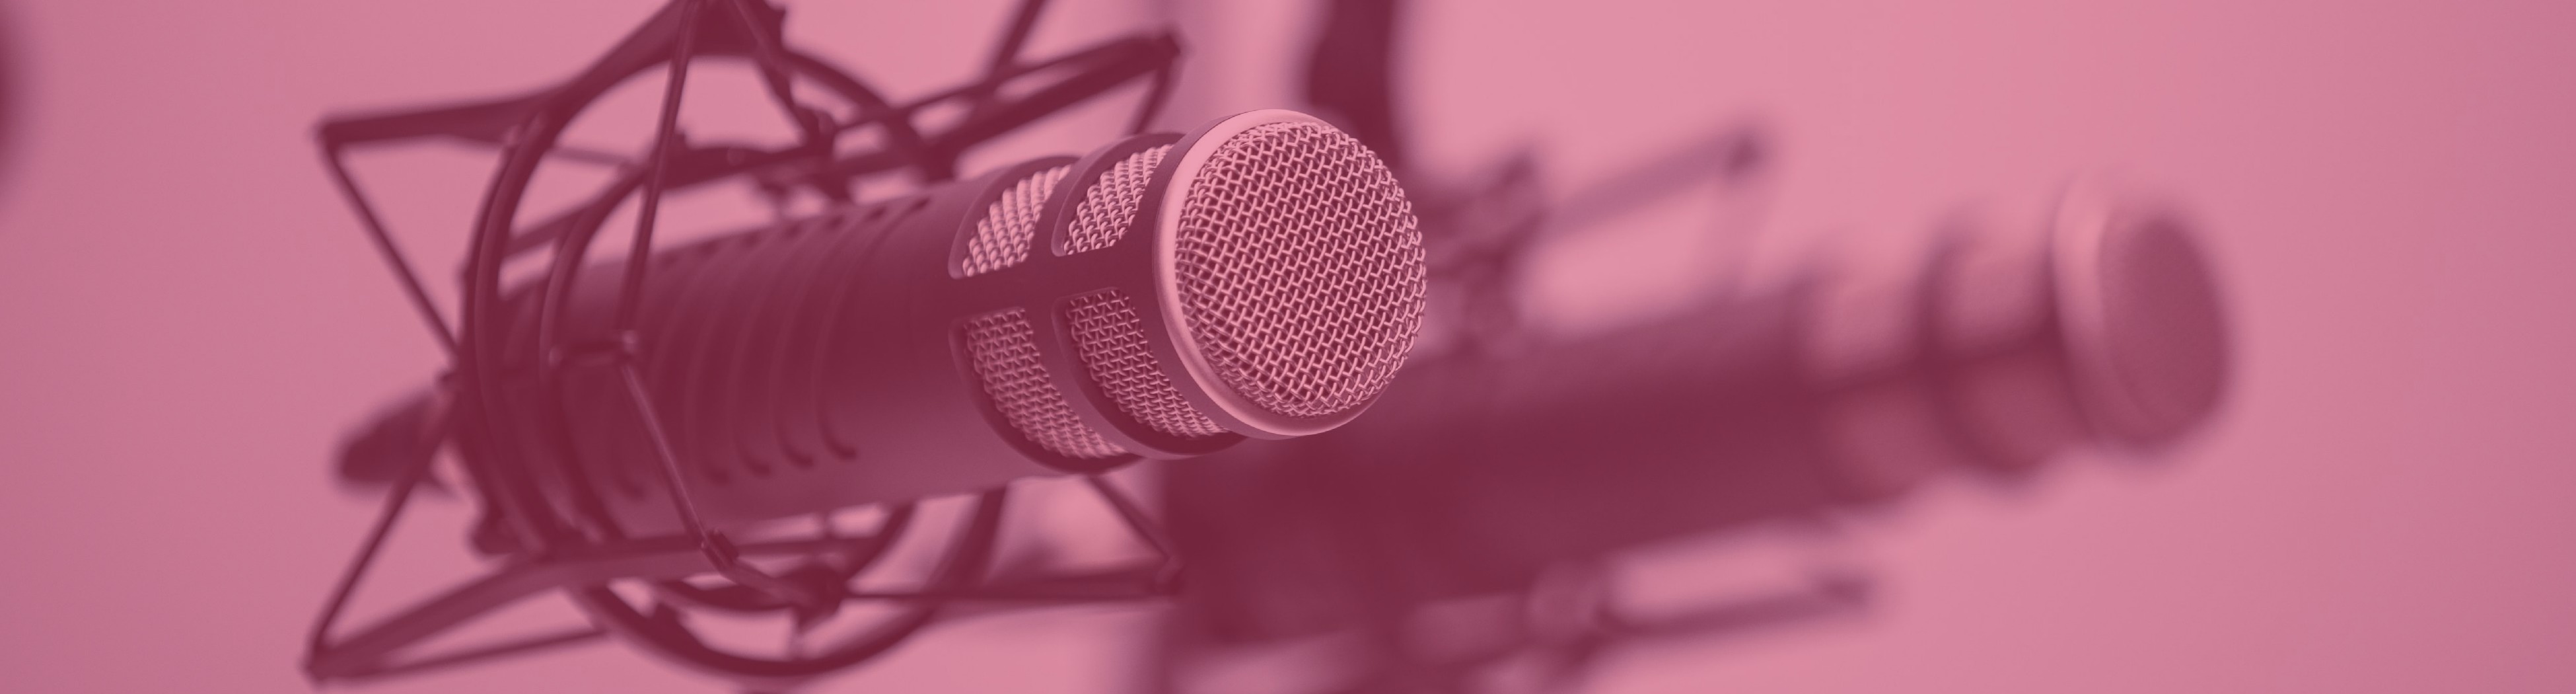 Podcasts for Breast Cancer Advocacy